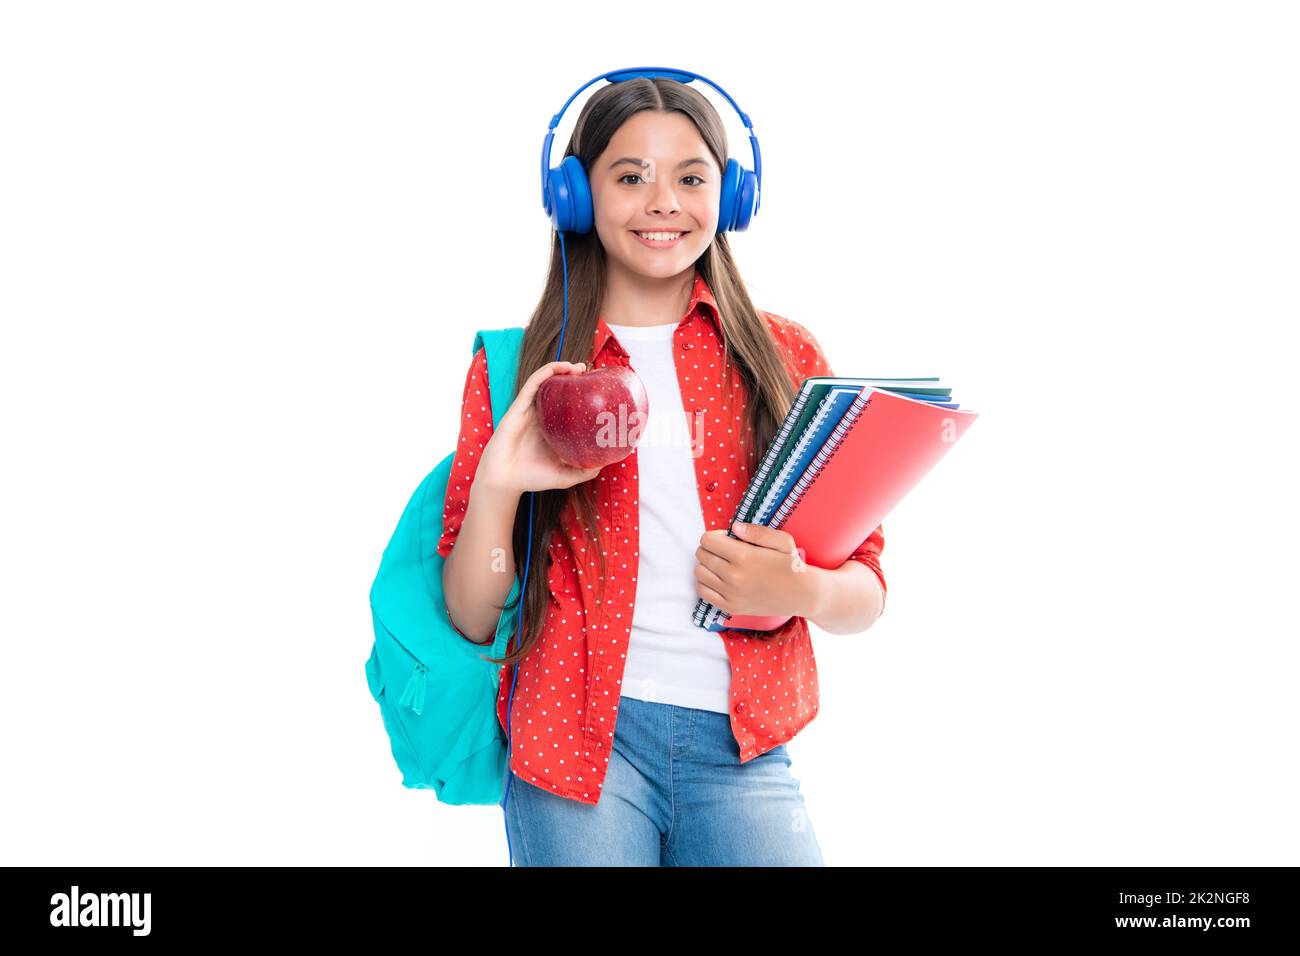 Schoolchild, teenage student girl with headphones and school bag backpack on white isolated studio background. Children school and education concept Stock Photo